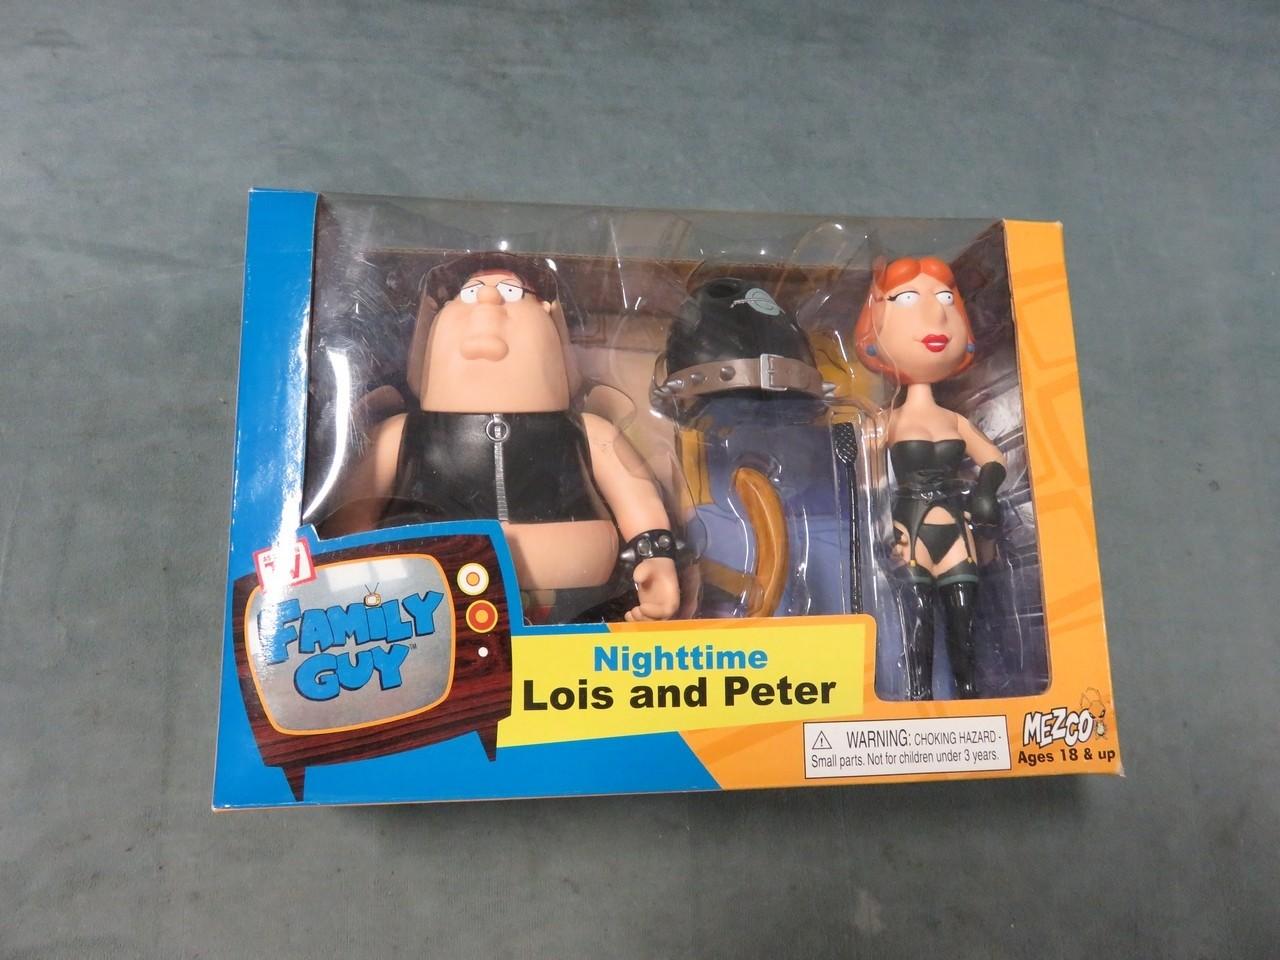 Family Guy Nighttime Lois and Peter Set